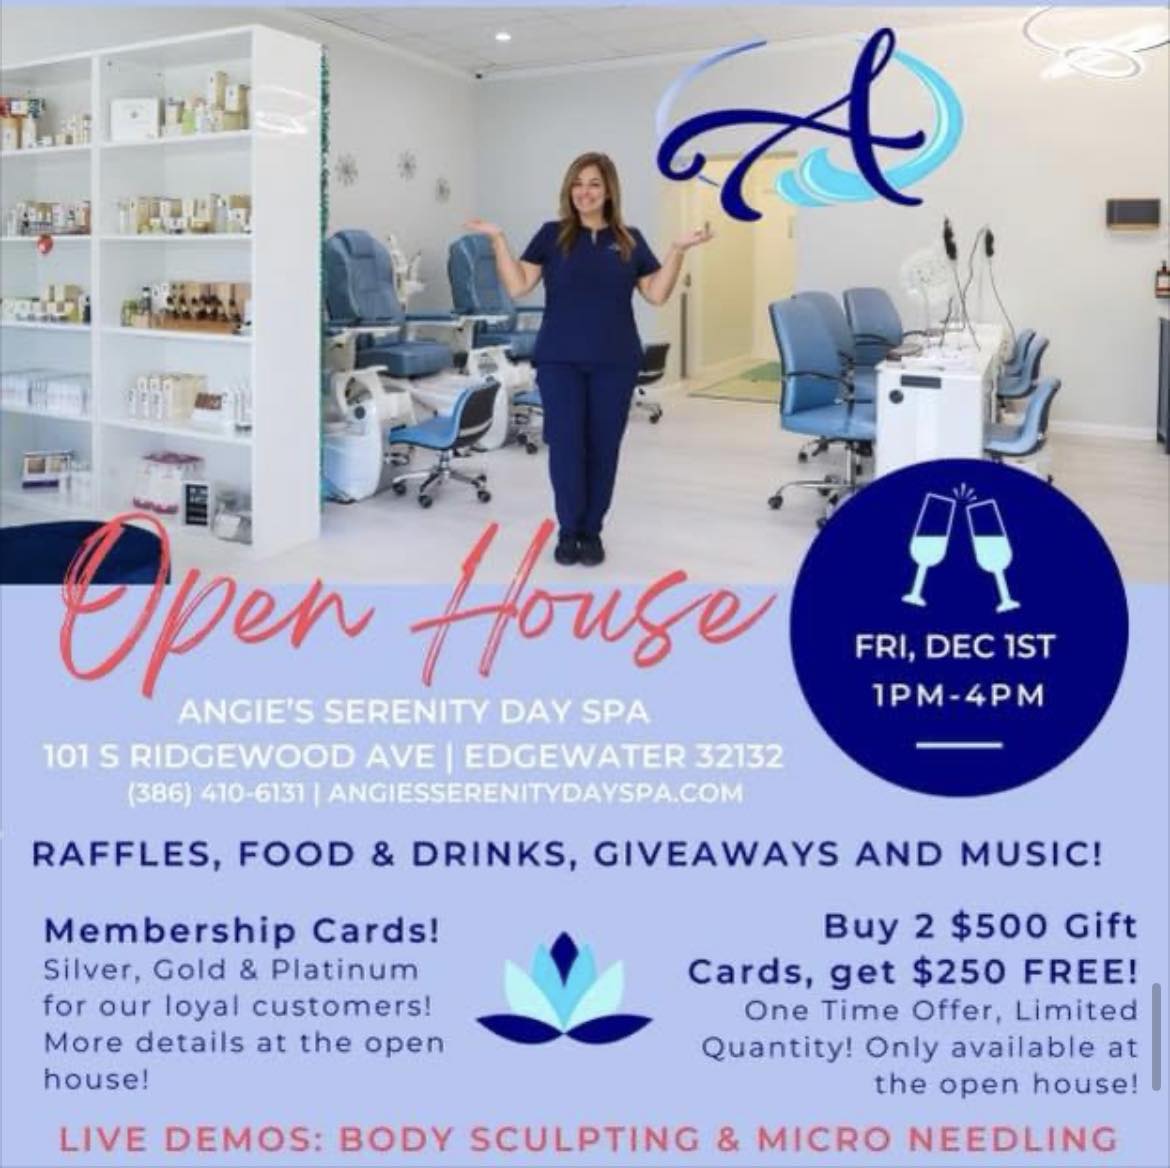 Angie’s Serenity Day Spa ll - Edgewater